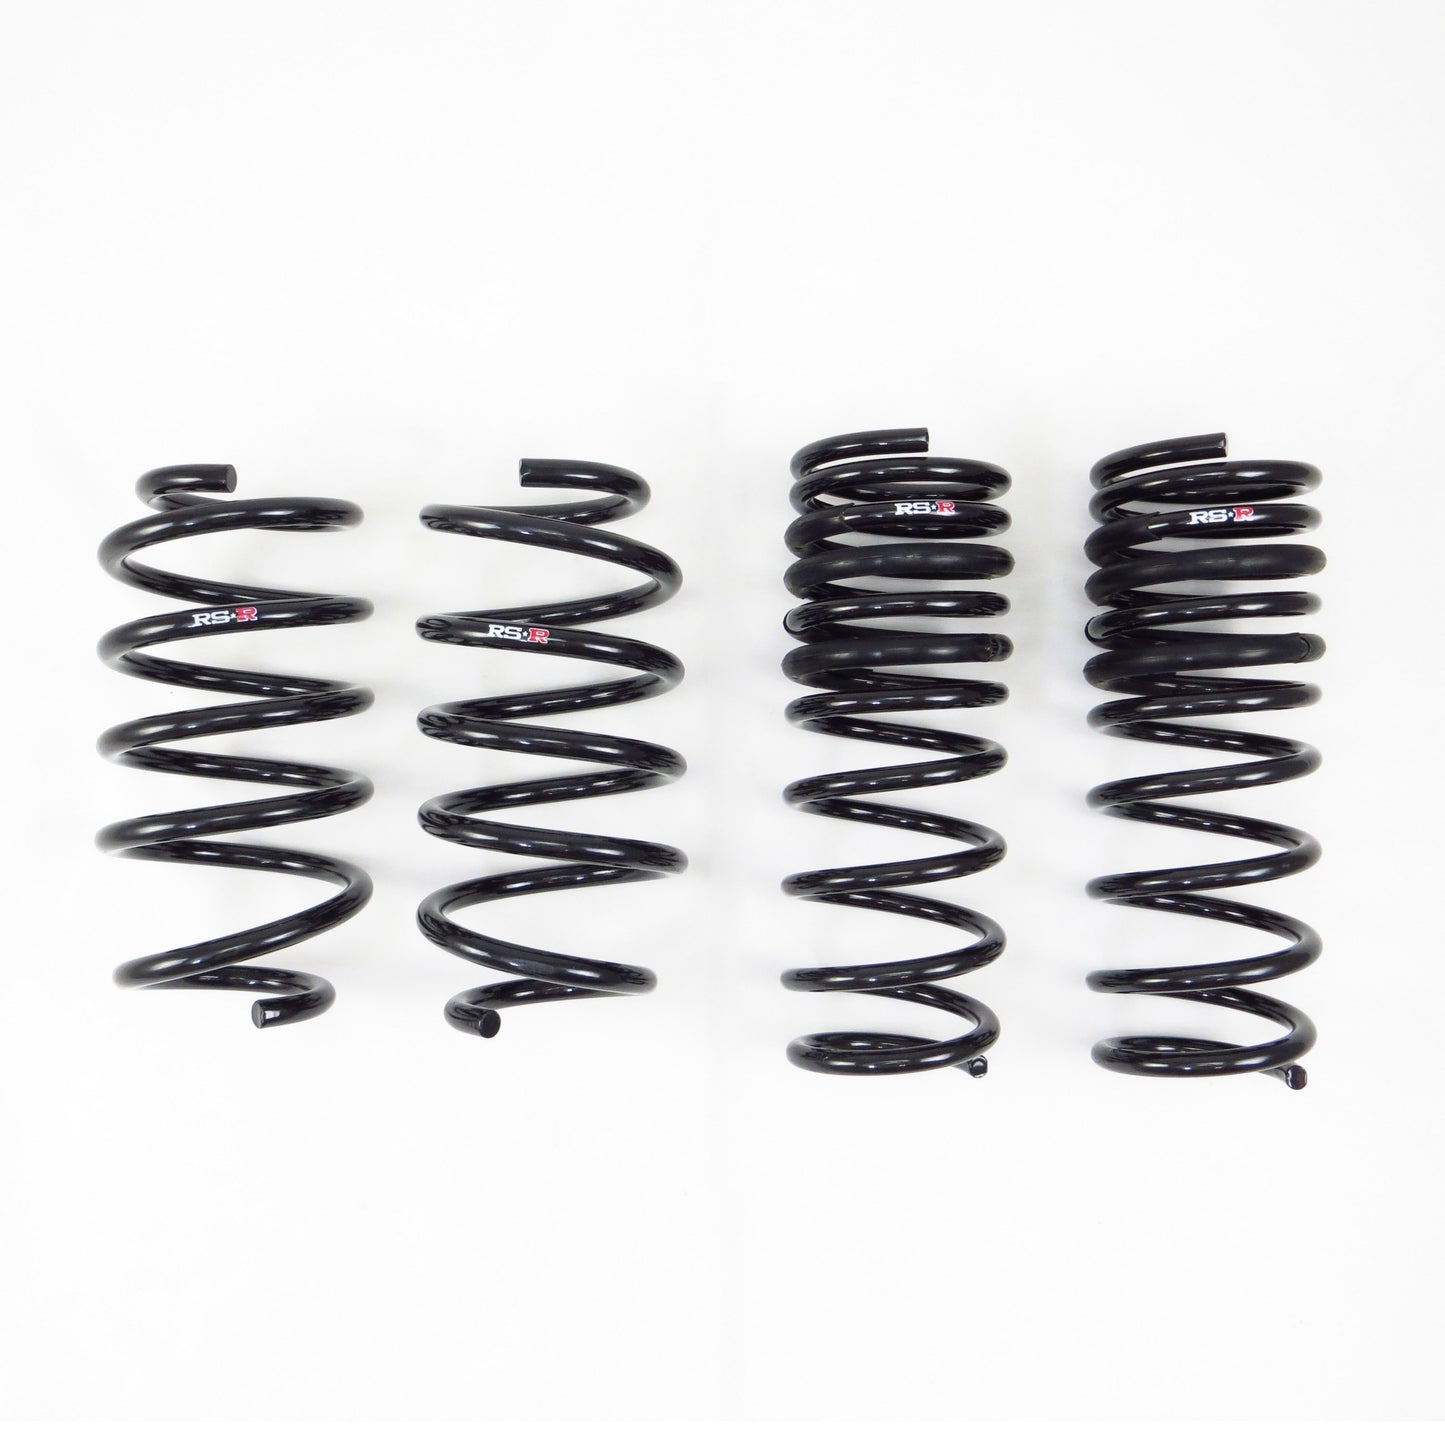 ACURA TLX FWD/AWD DOWN SUS SPRINGS 2015-2020